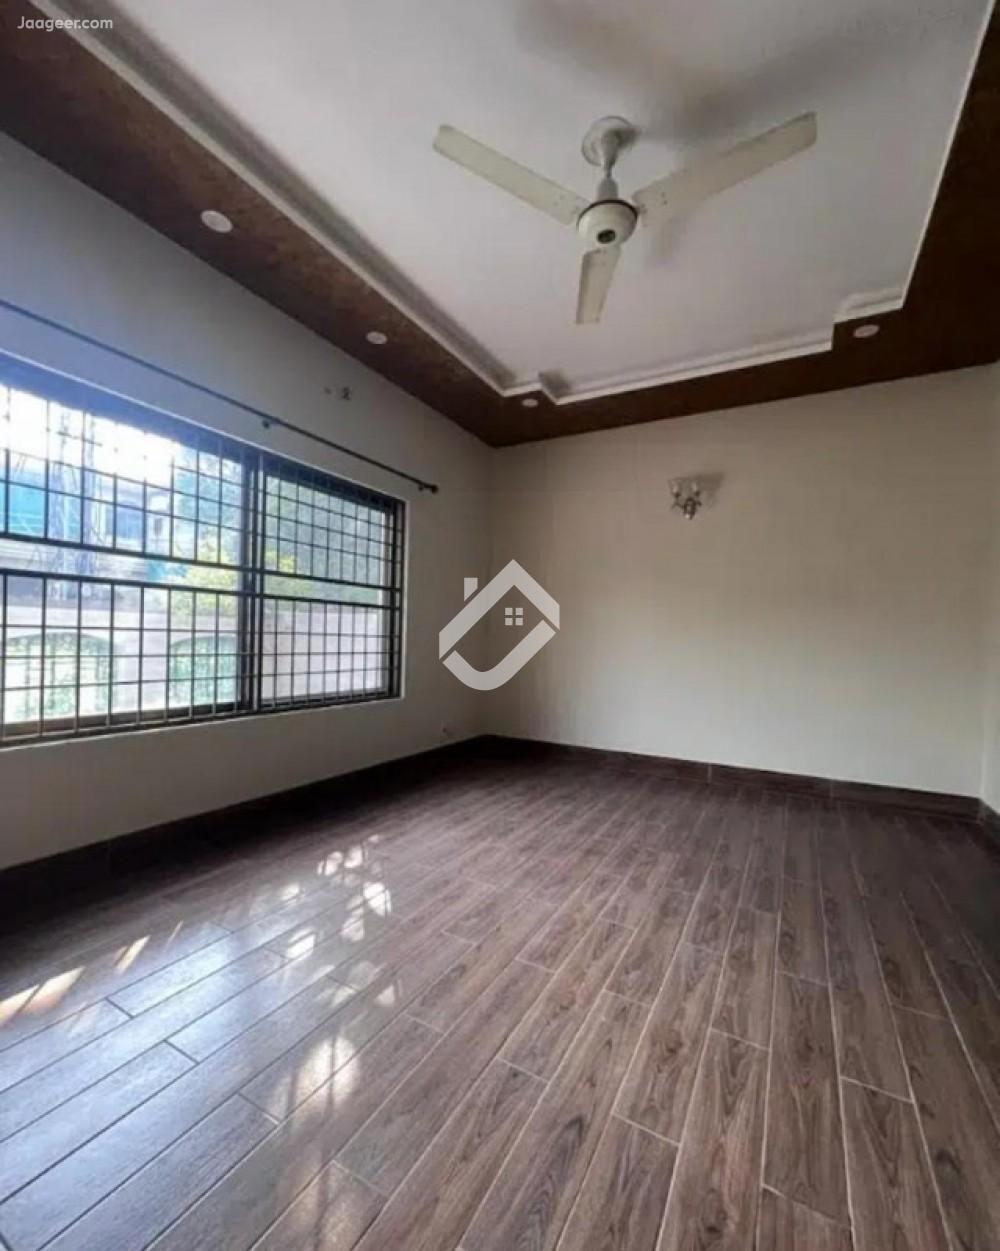 View  10 Marla Double Storey House For Rent In DHA Phase 8 in DHA Phase 8, Lahore